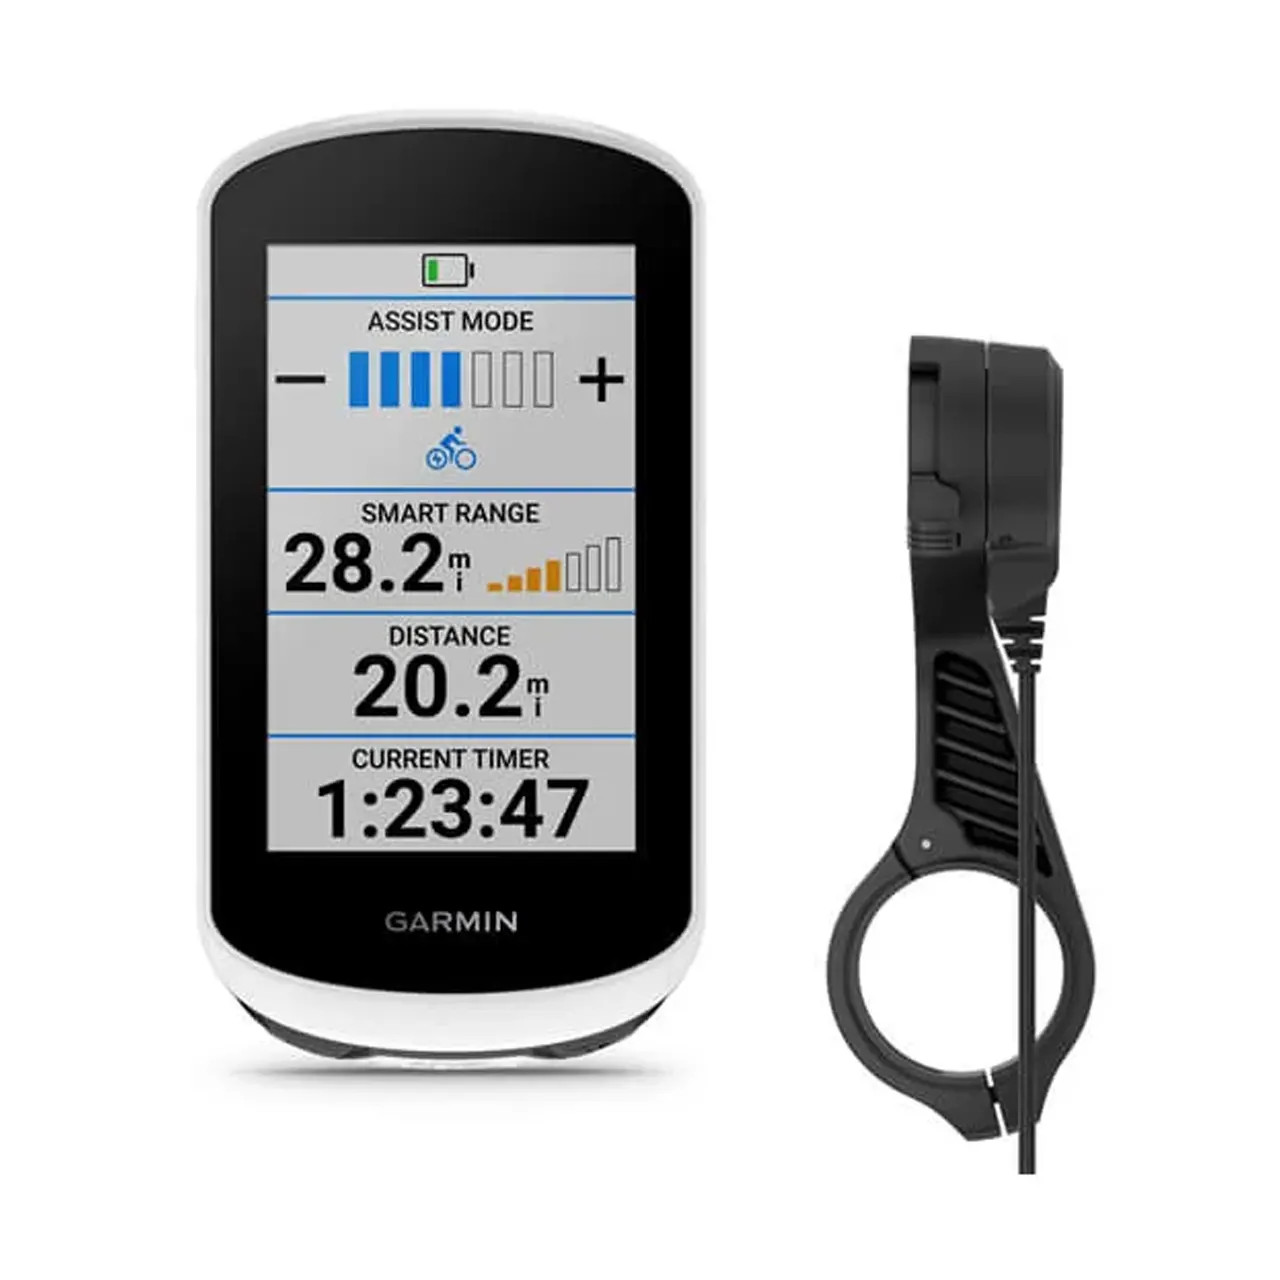 lindring Depression hungersnød Garmin Edge Explore 2 - Power Mount Bundle - Includes Power Pin Connectors  - Easy-to-Use GPS Cycling Navigator - with Safety Features - EZEE.com:  High-end made ezee!